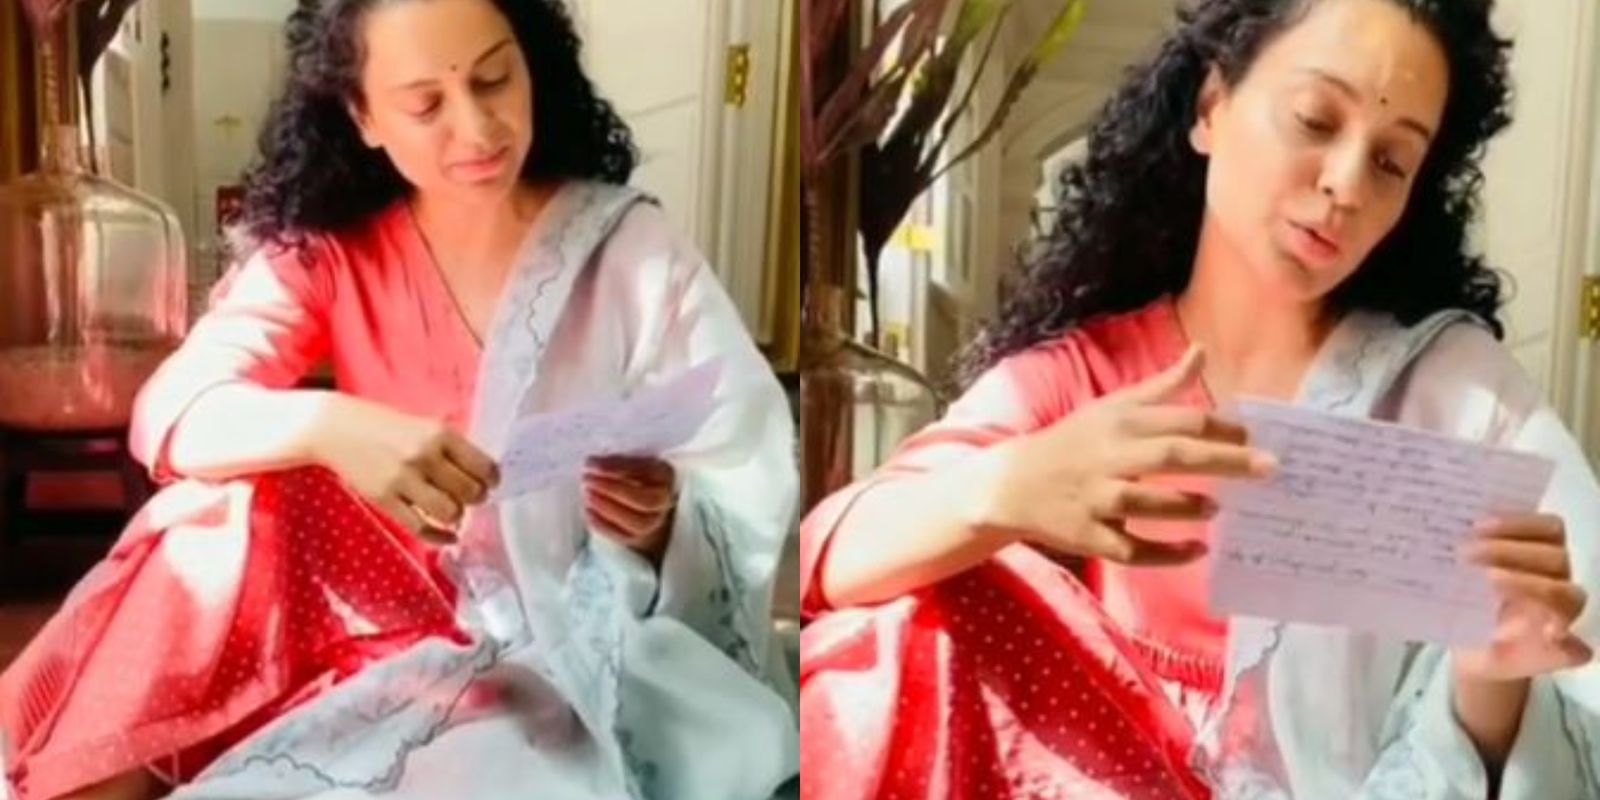 Mother's Day 2020: Kangana Ranaut Pens A Heartfelt Poem For Her Mom: You Arise In My Heart, As A Longing ... For Love